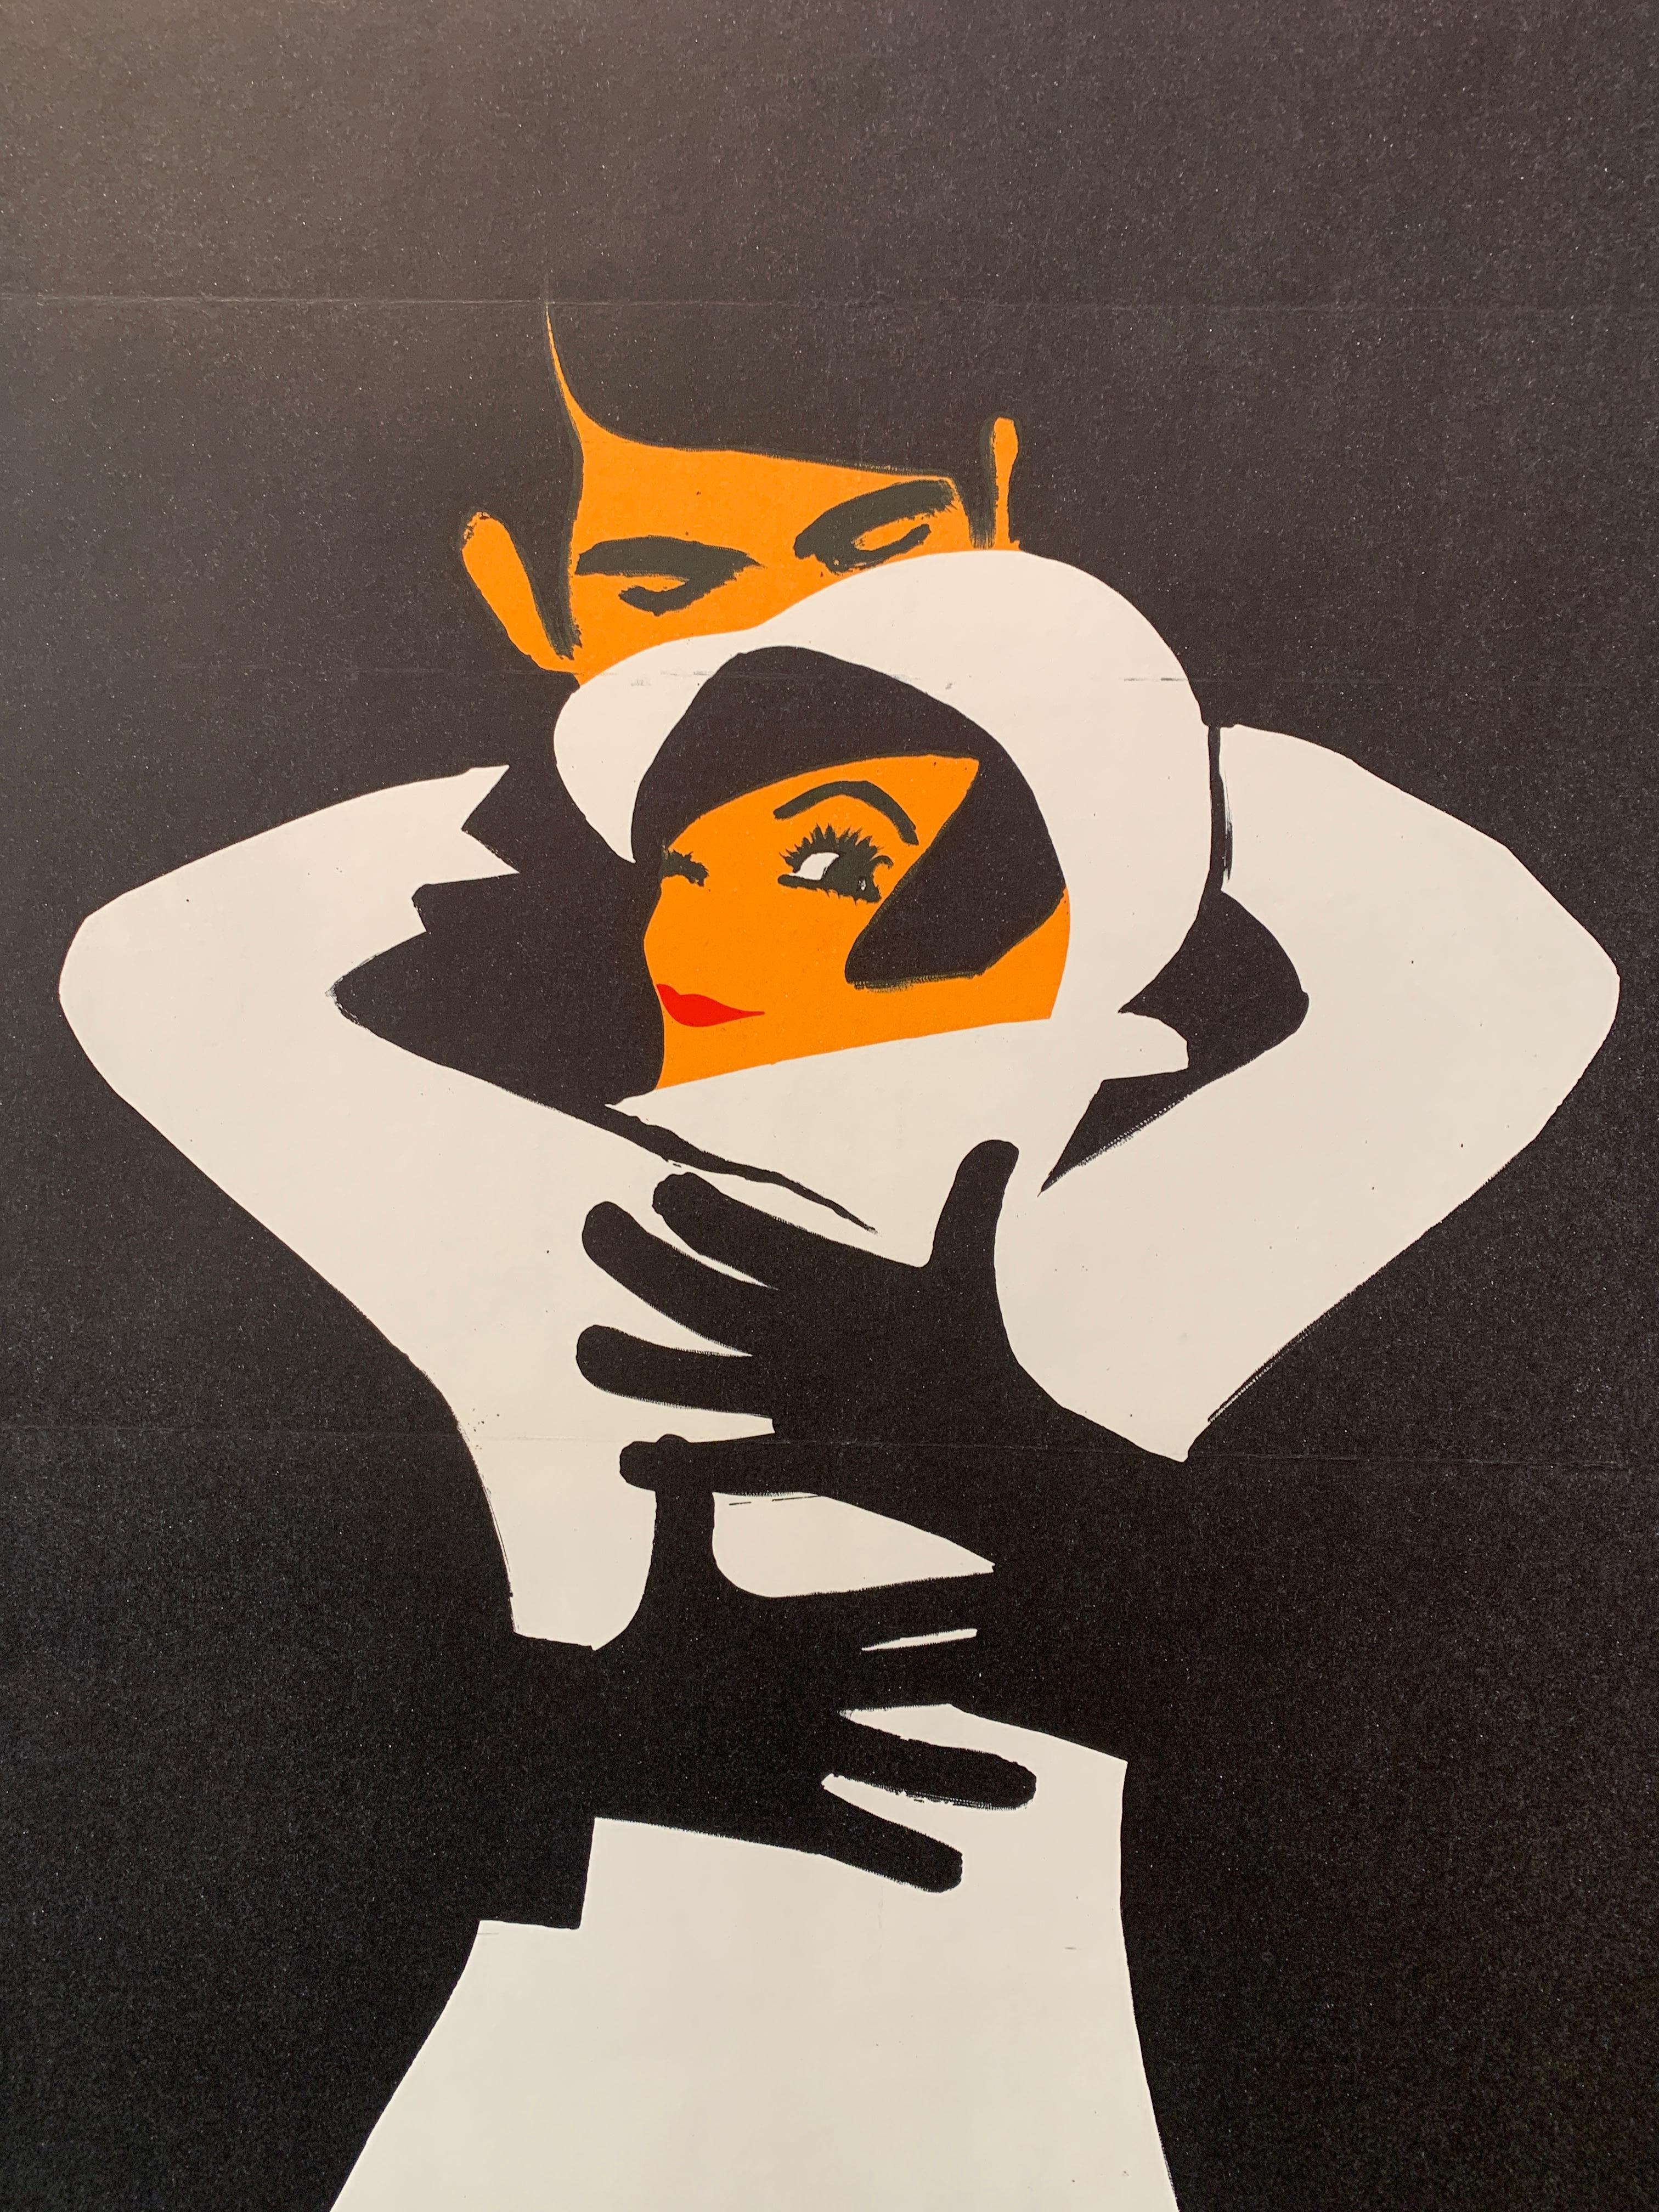 Modern 'BLIZZAND EMBRACE' Original Vintage Advertising Poster c. 1968 by GRUAU For Sale